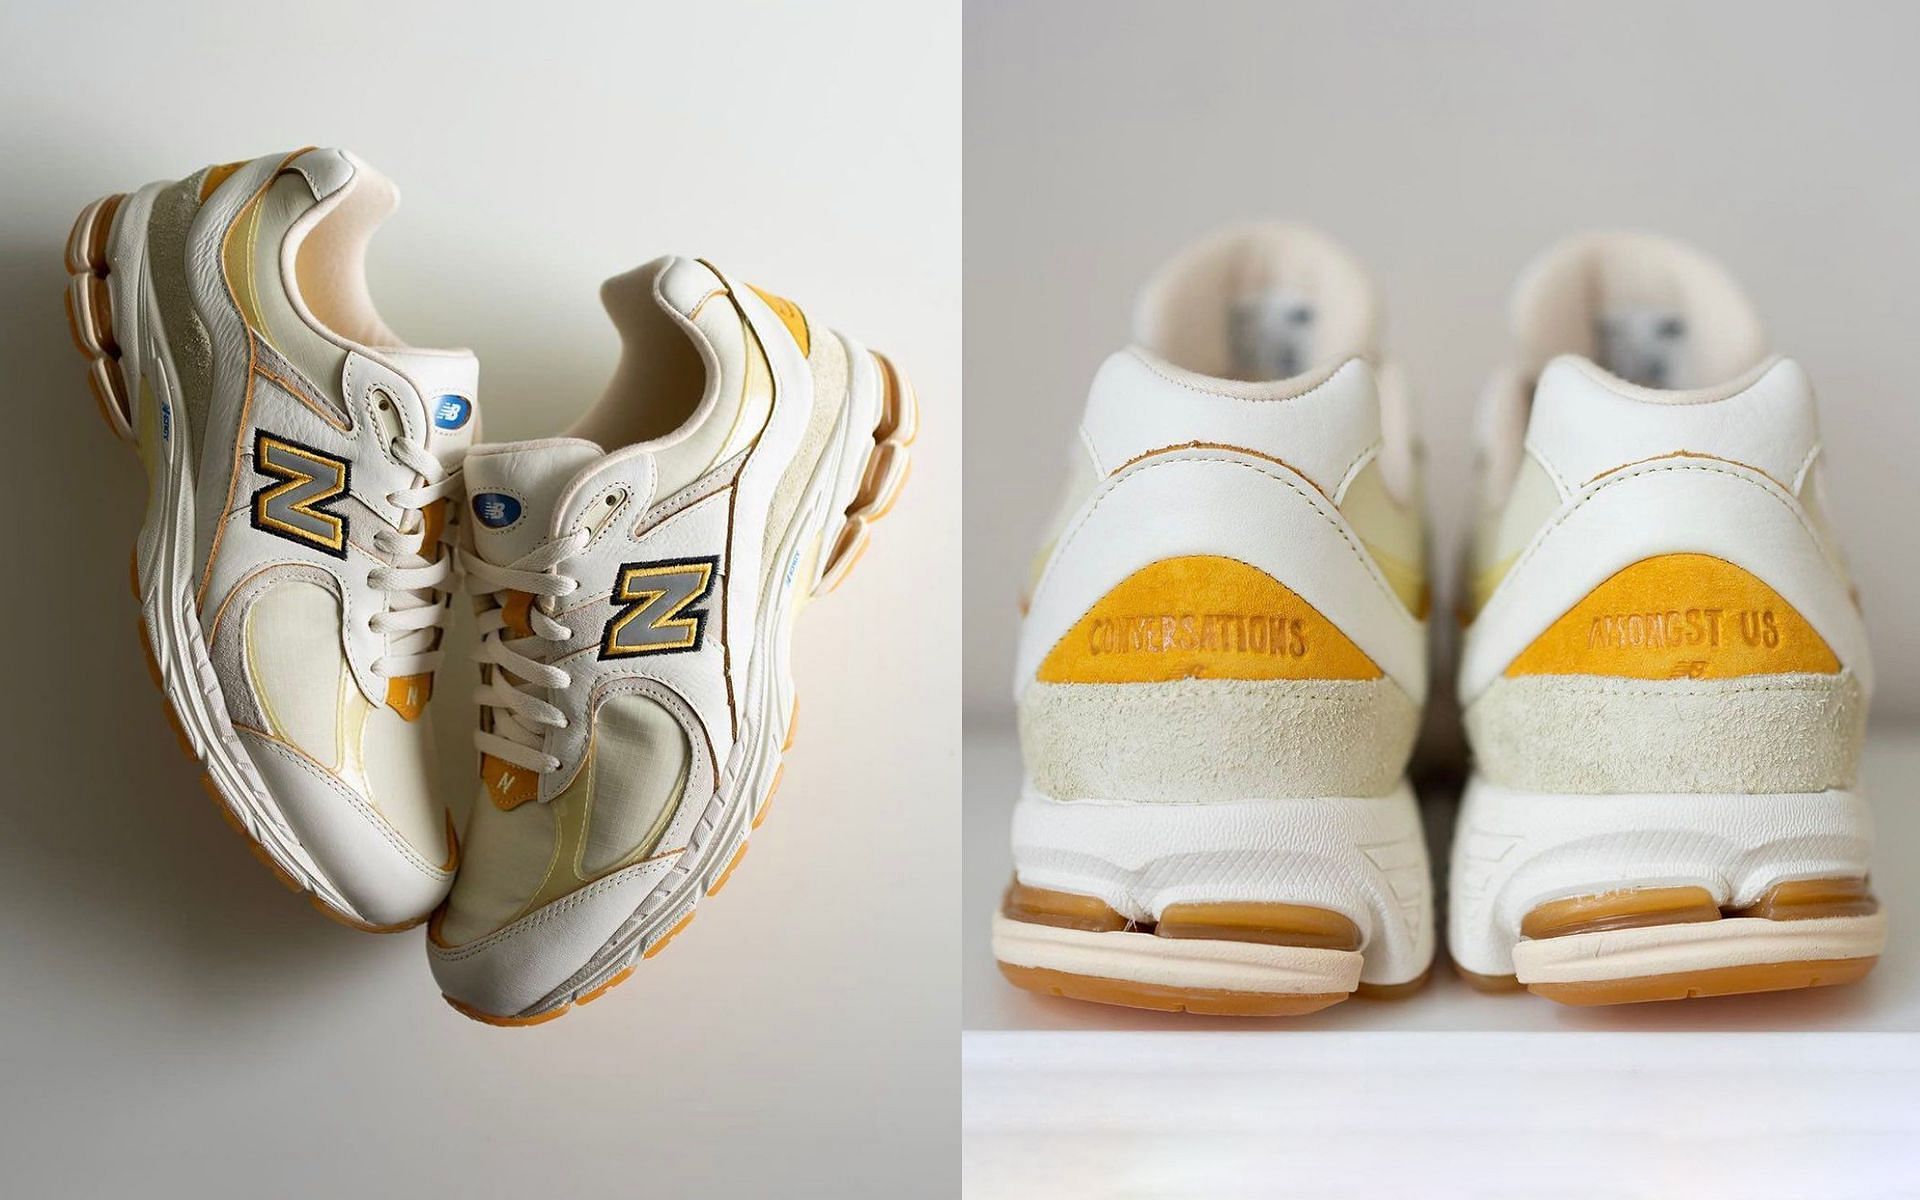 Take a closer look at the Conversation Amongst Us colorway (Image via NB)